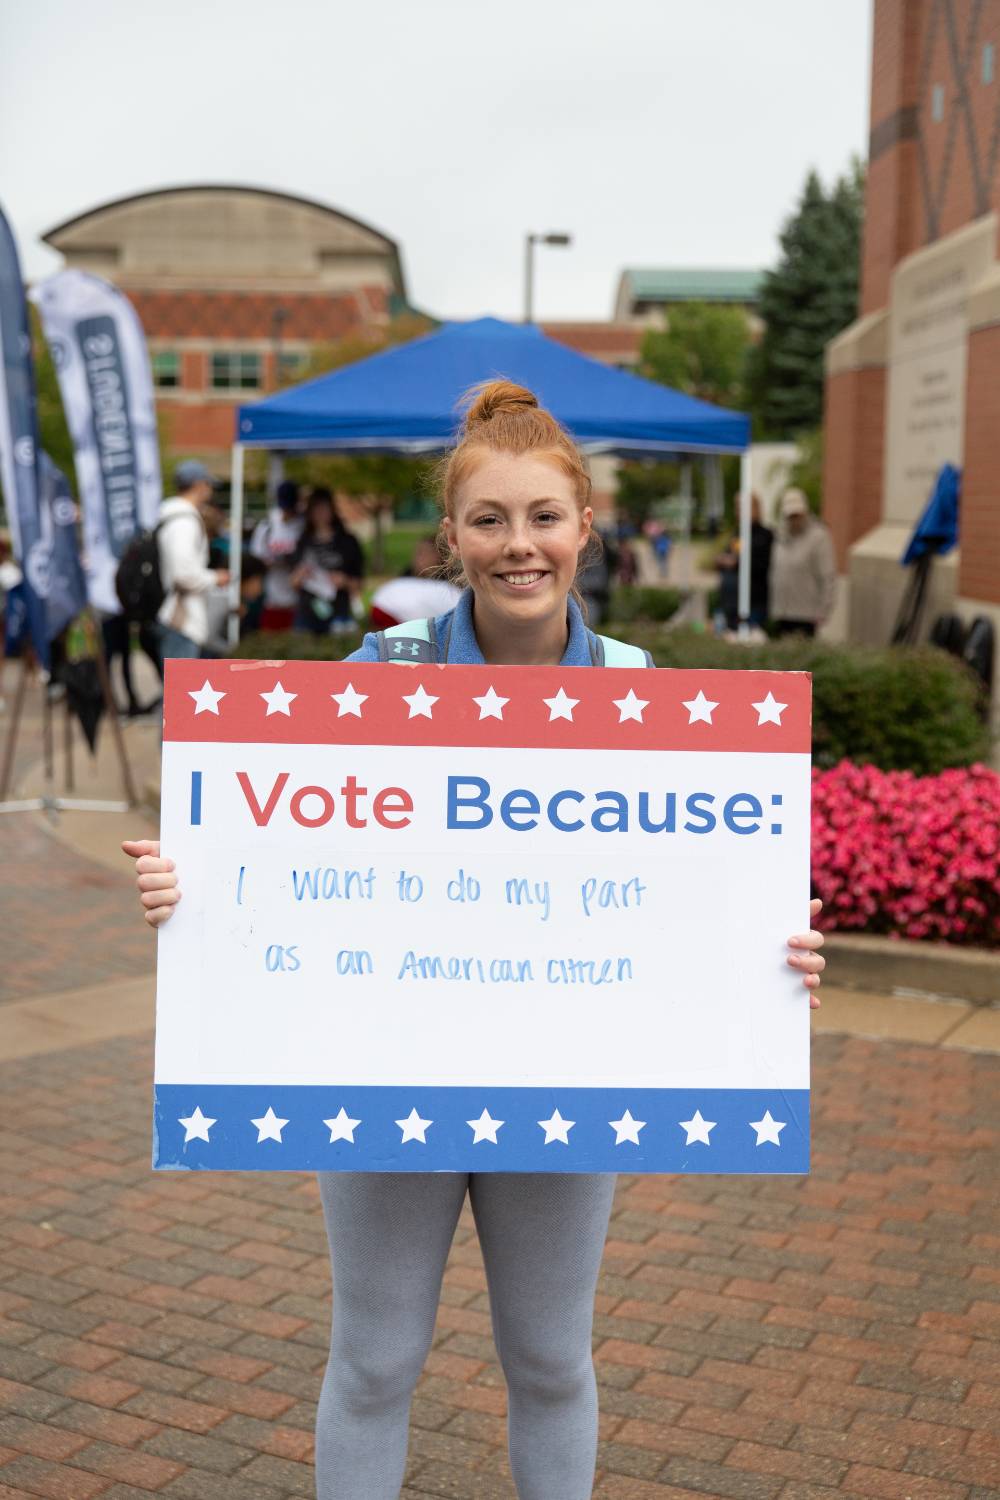 Student holding sign titled "I vote because: I want to do my part as an American citizen"